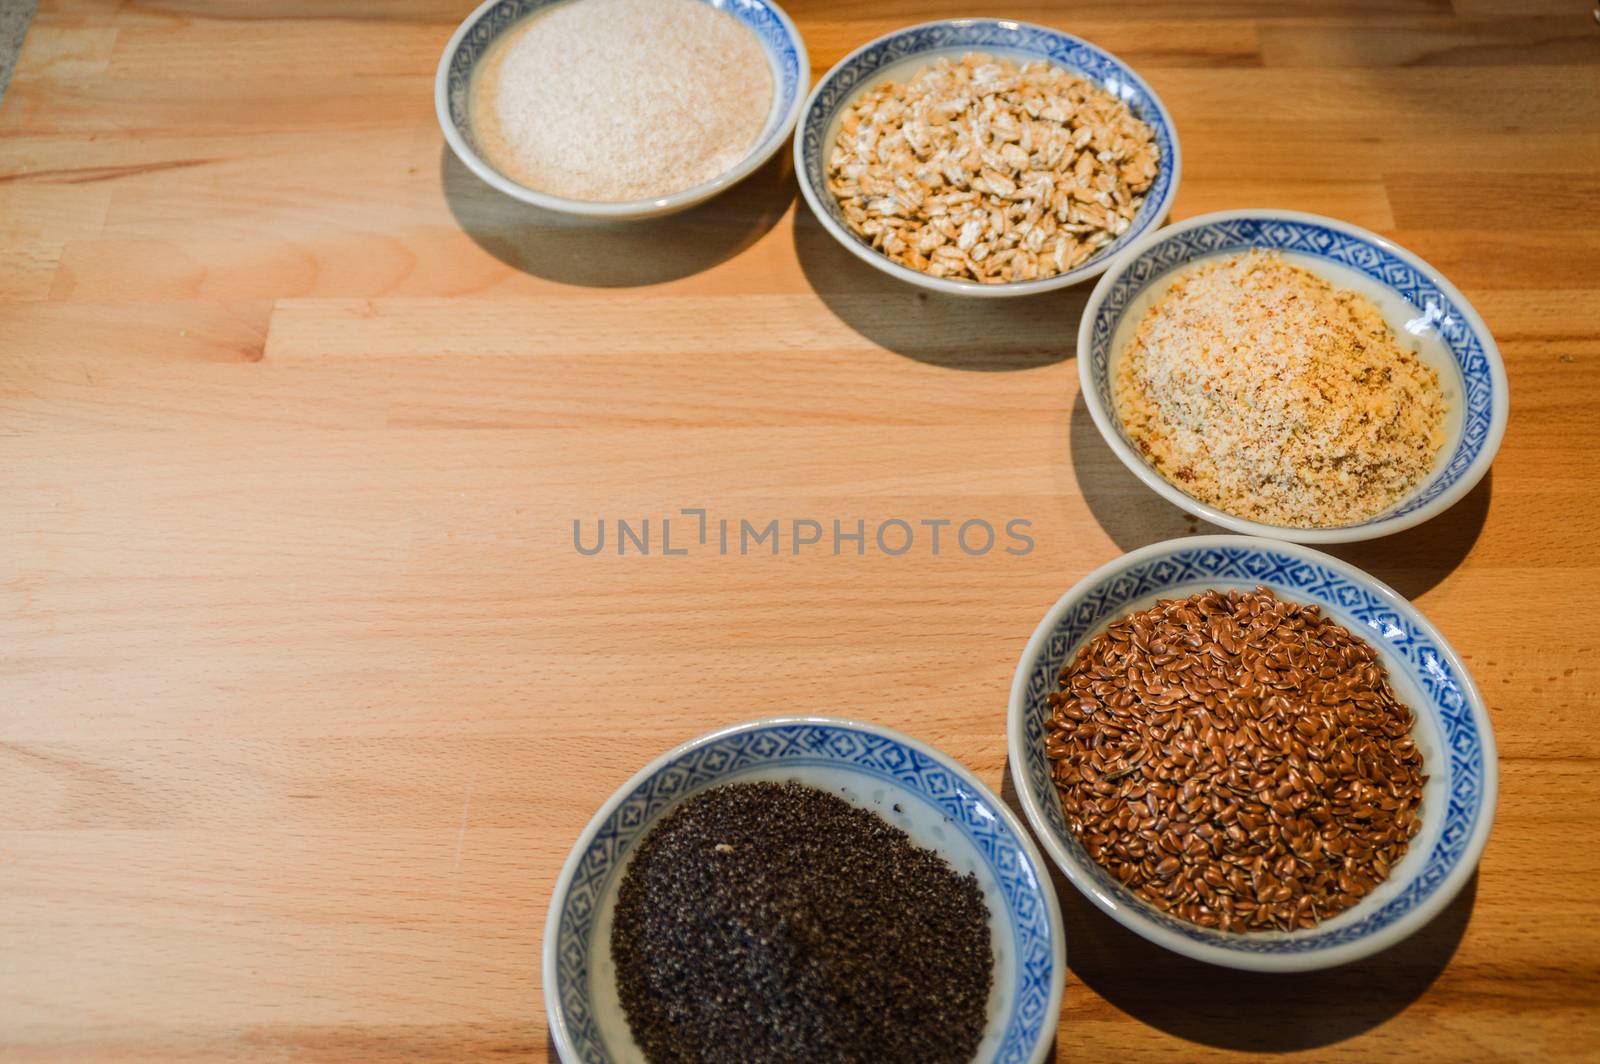 Various grains of oats, millet and ground nuts in plates for baking gluten-free bread